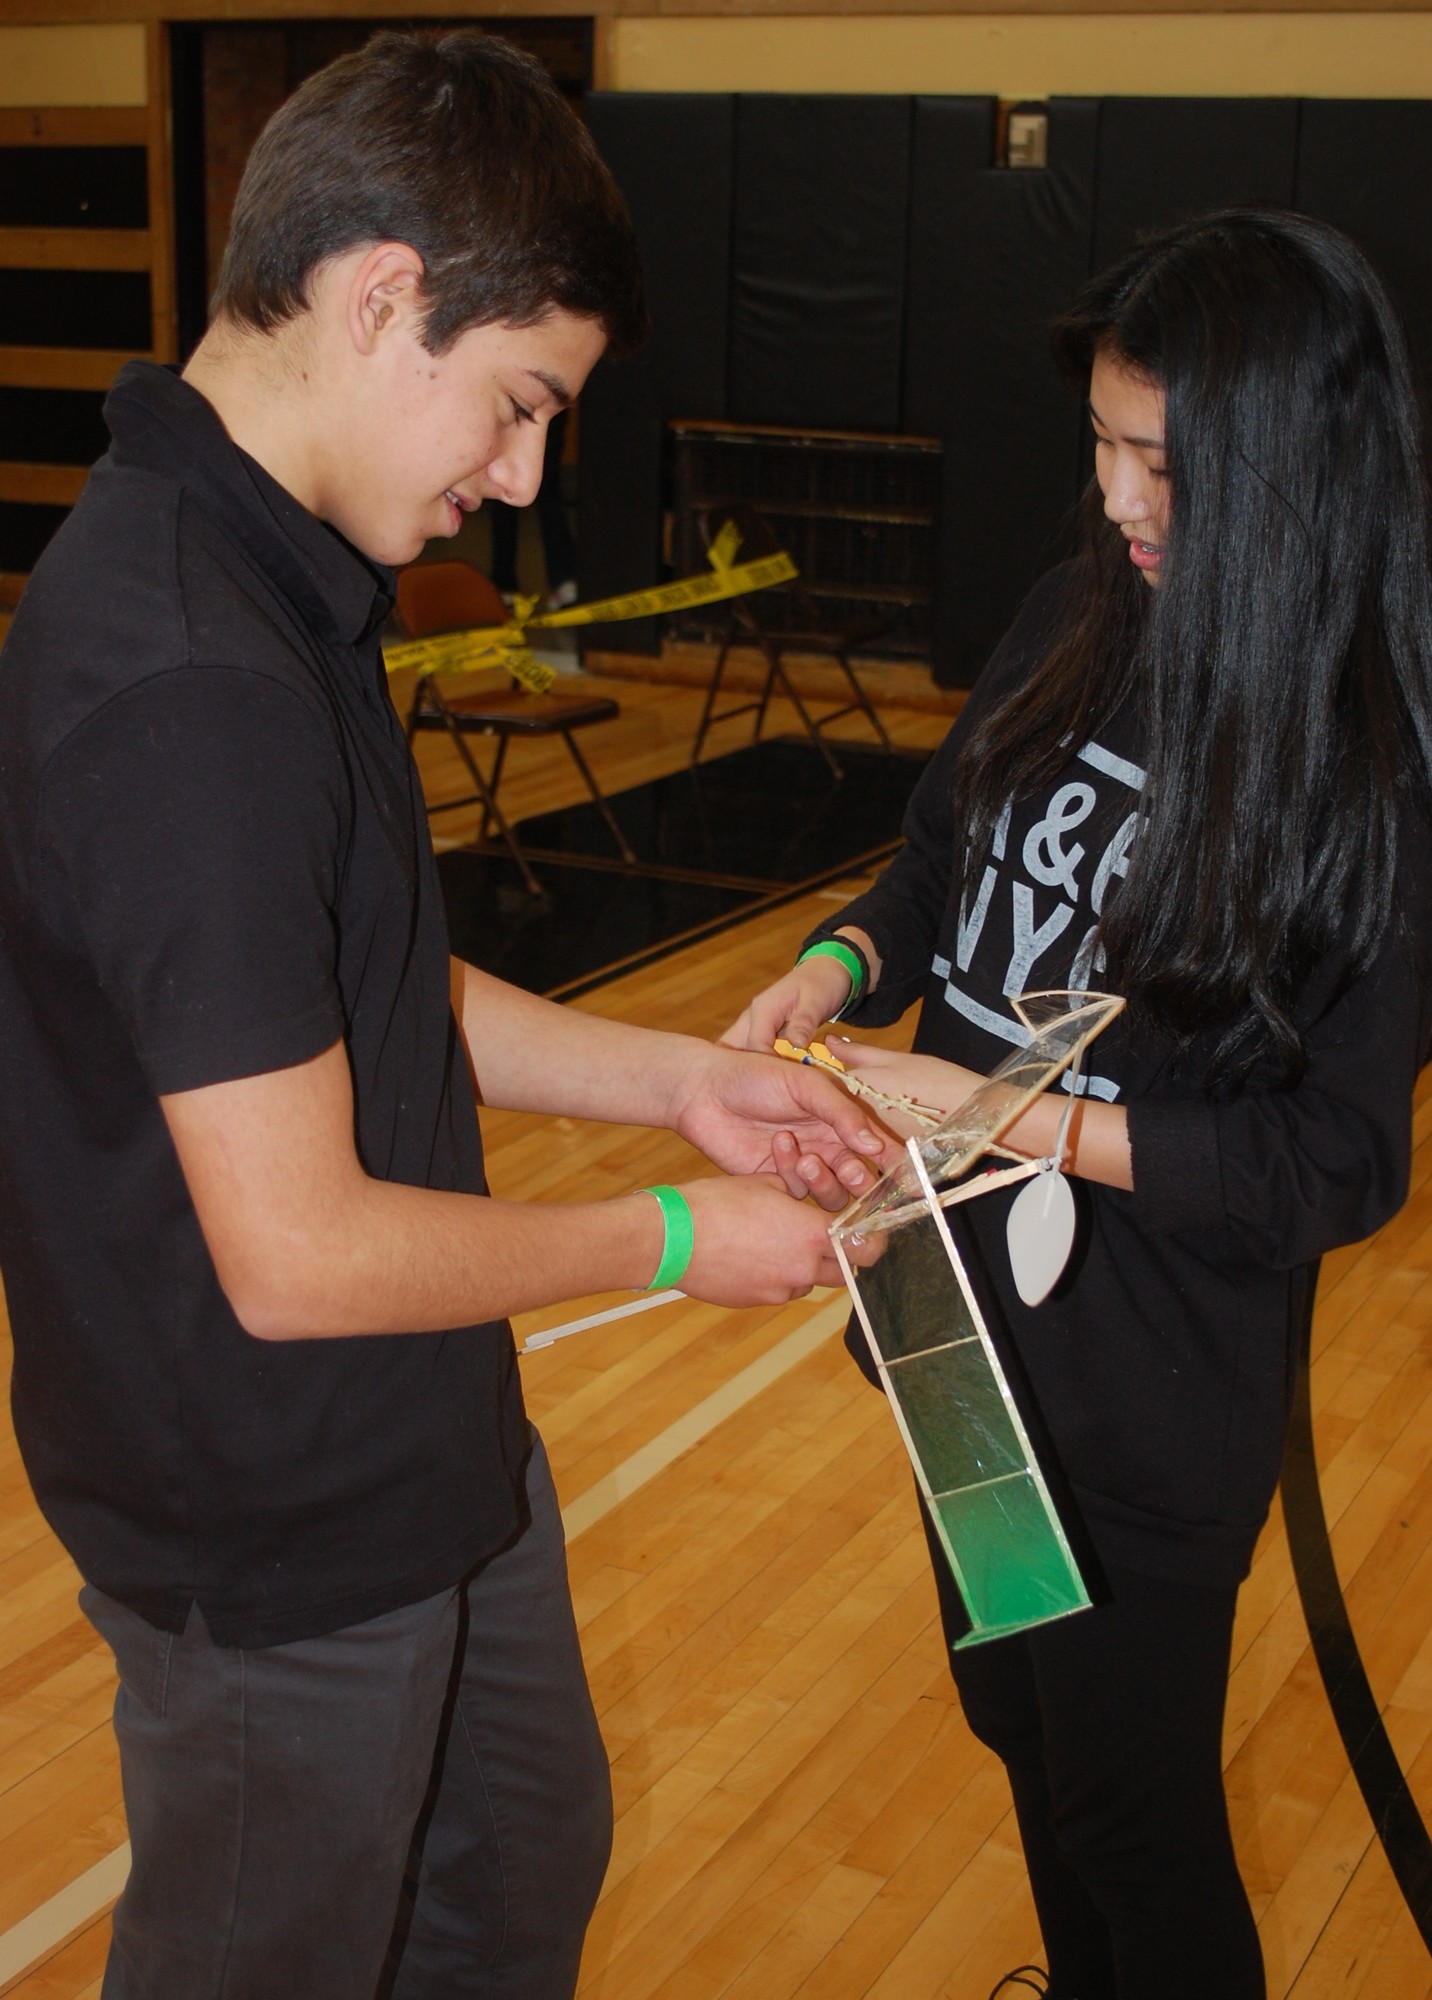 Steven Glatter and Ashley Kim of MacArthur High School made a repair to their airplane in the “Wright Stuff” event.